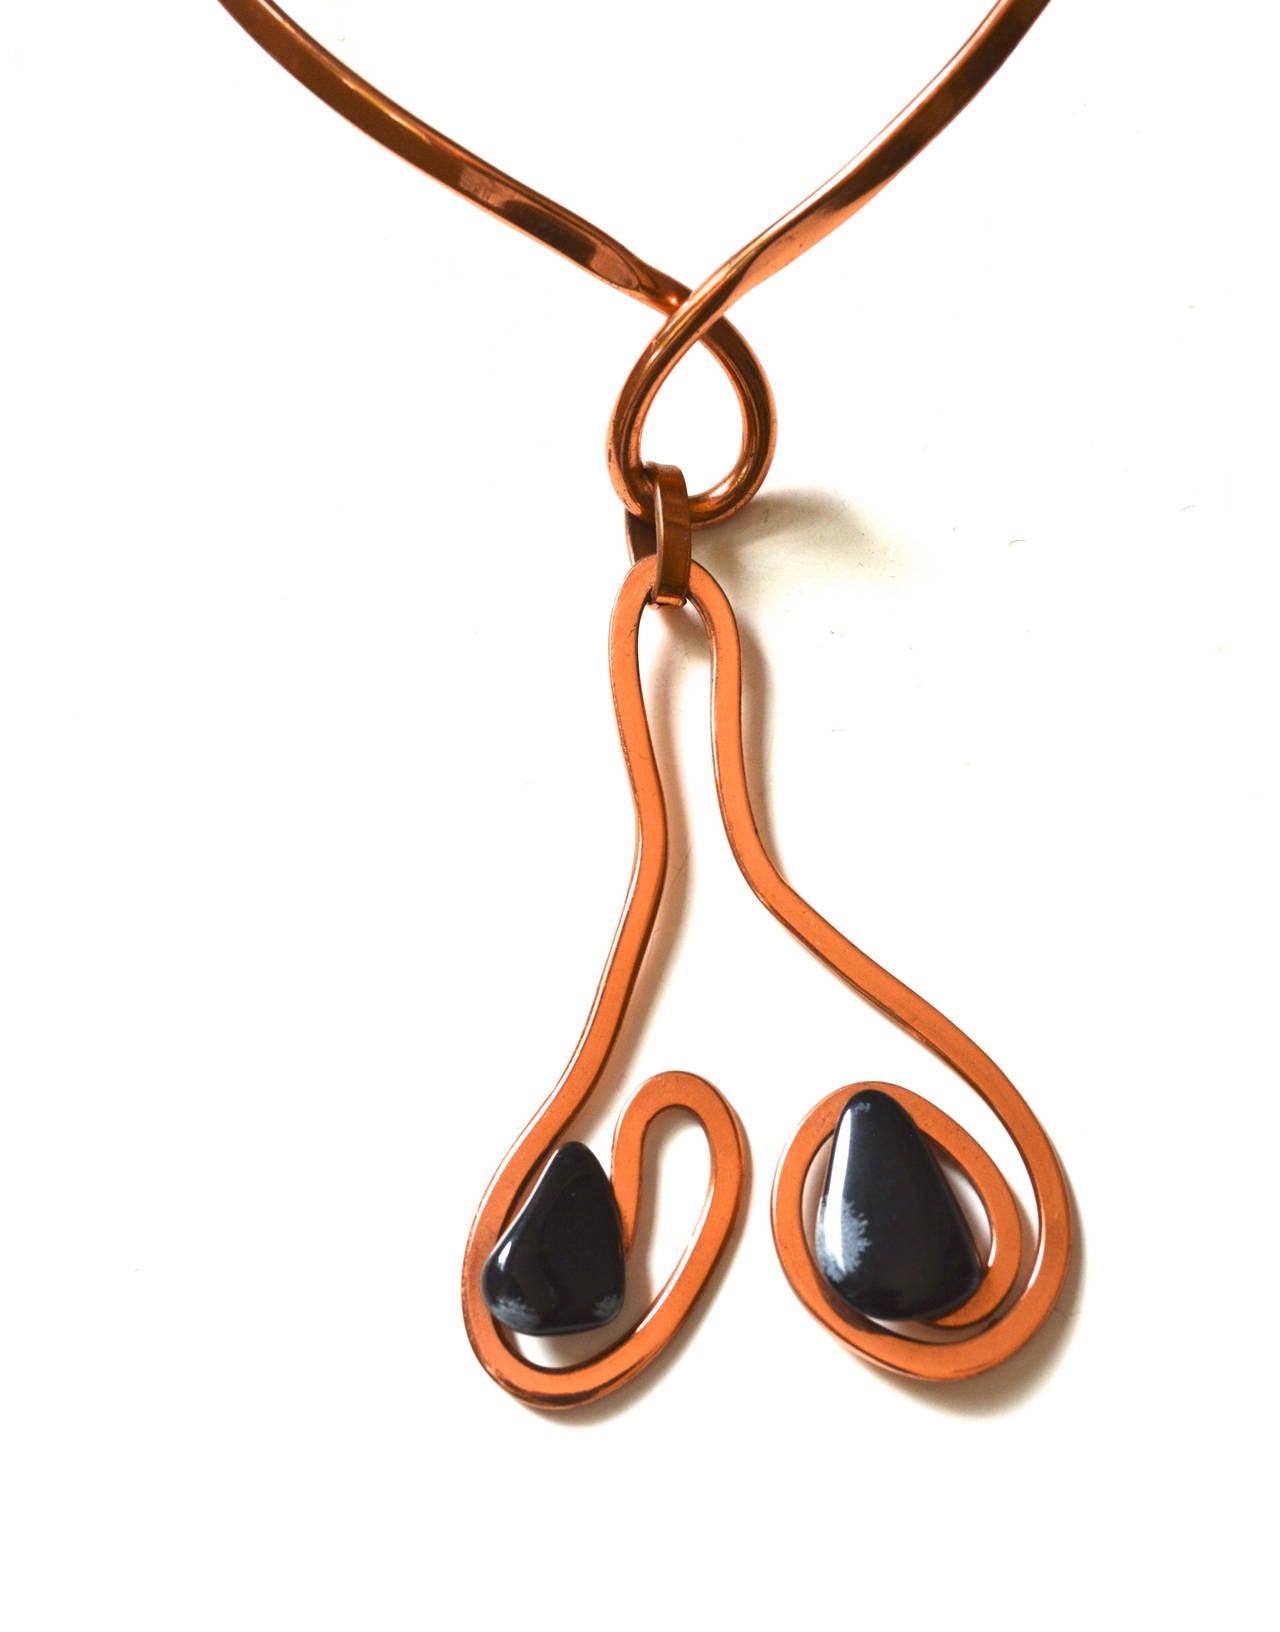 Mid century modern copper and stone art wire necklace. Lovely torque style fit and shape. Circa 1960s-70s.  11